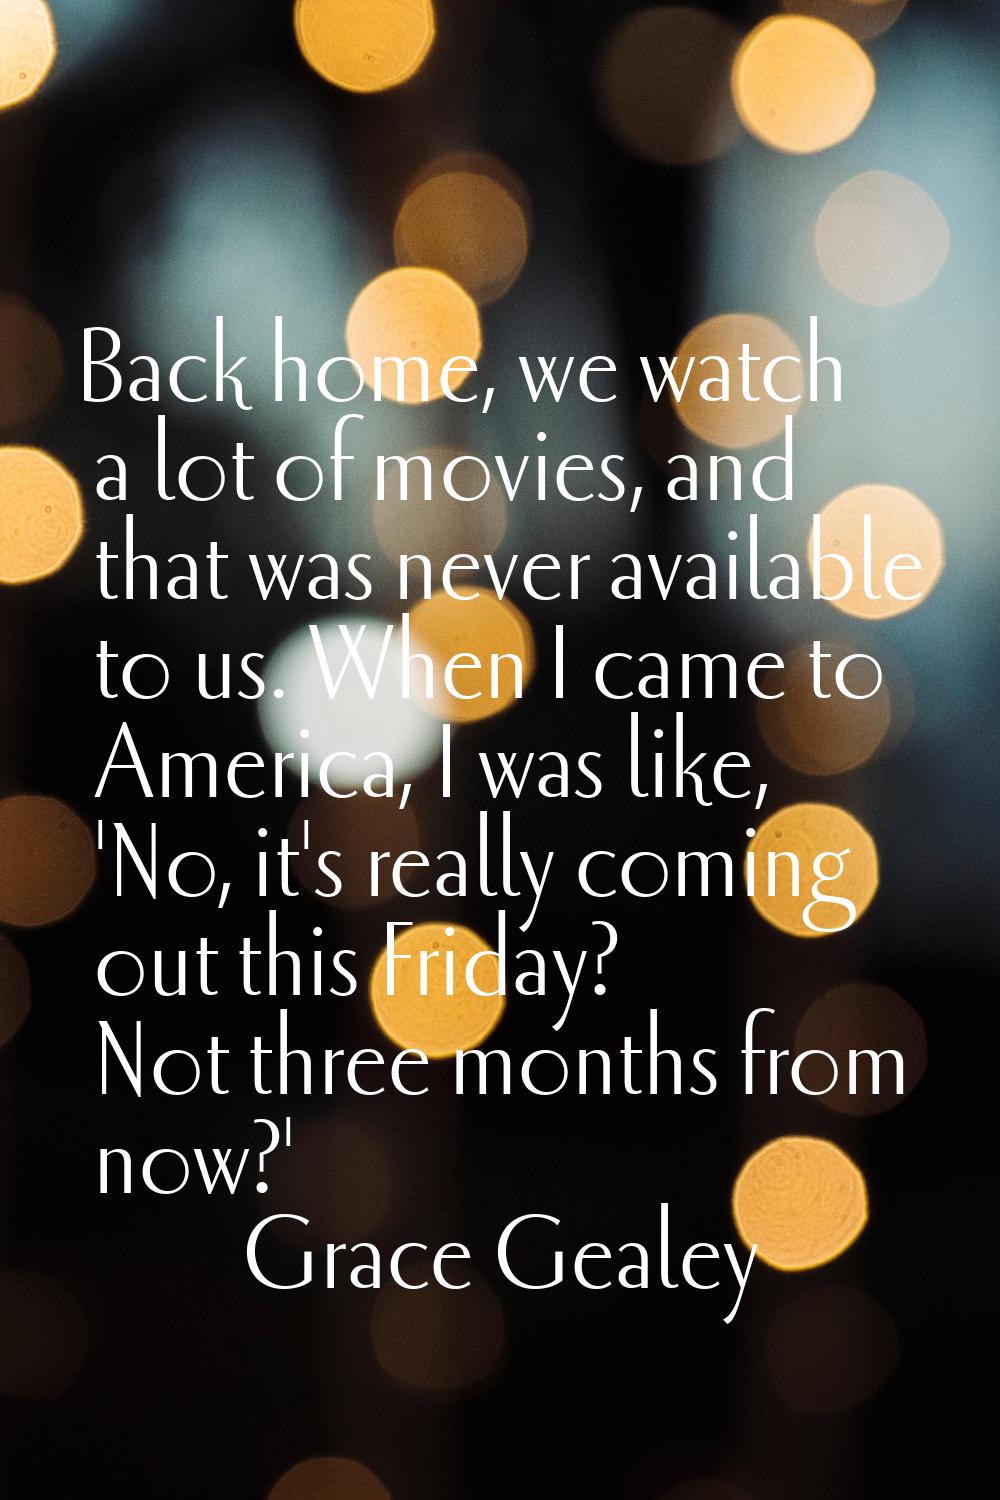 Back home, we watch a lot of movies, and that was never available to us. When I came to America, I 